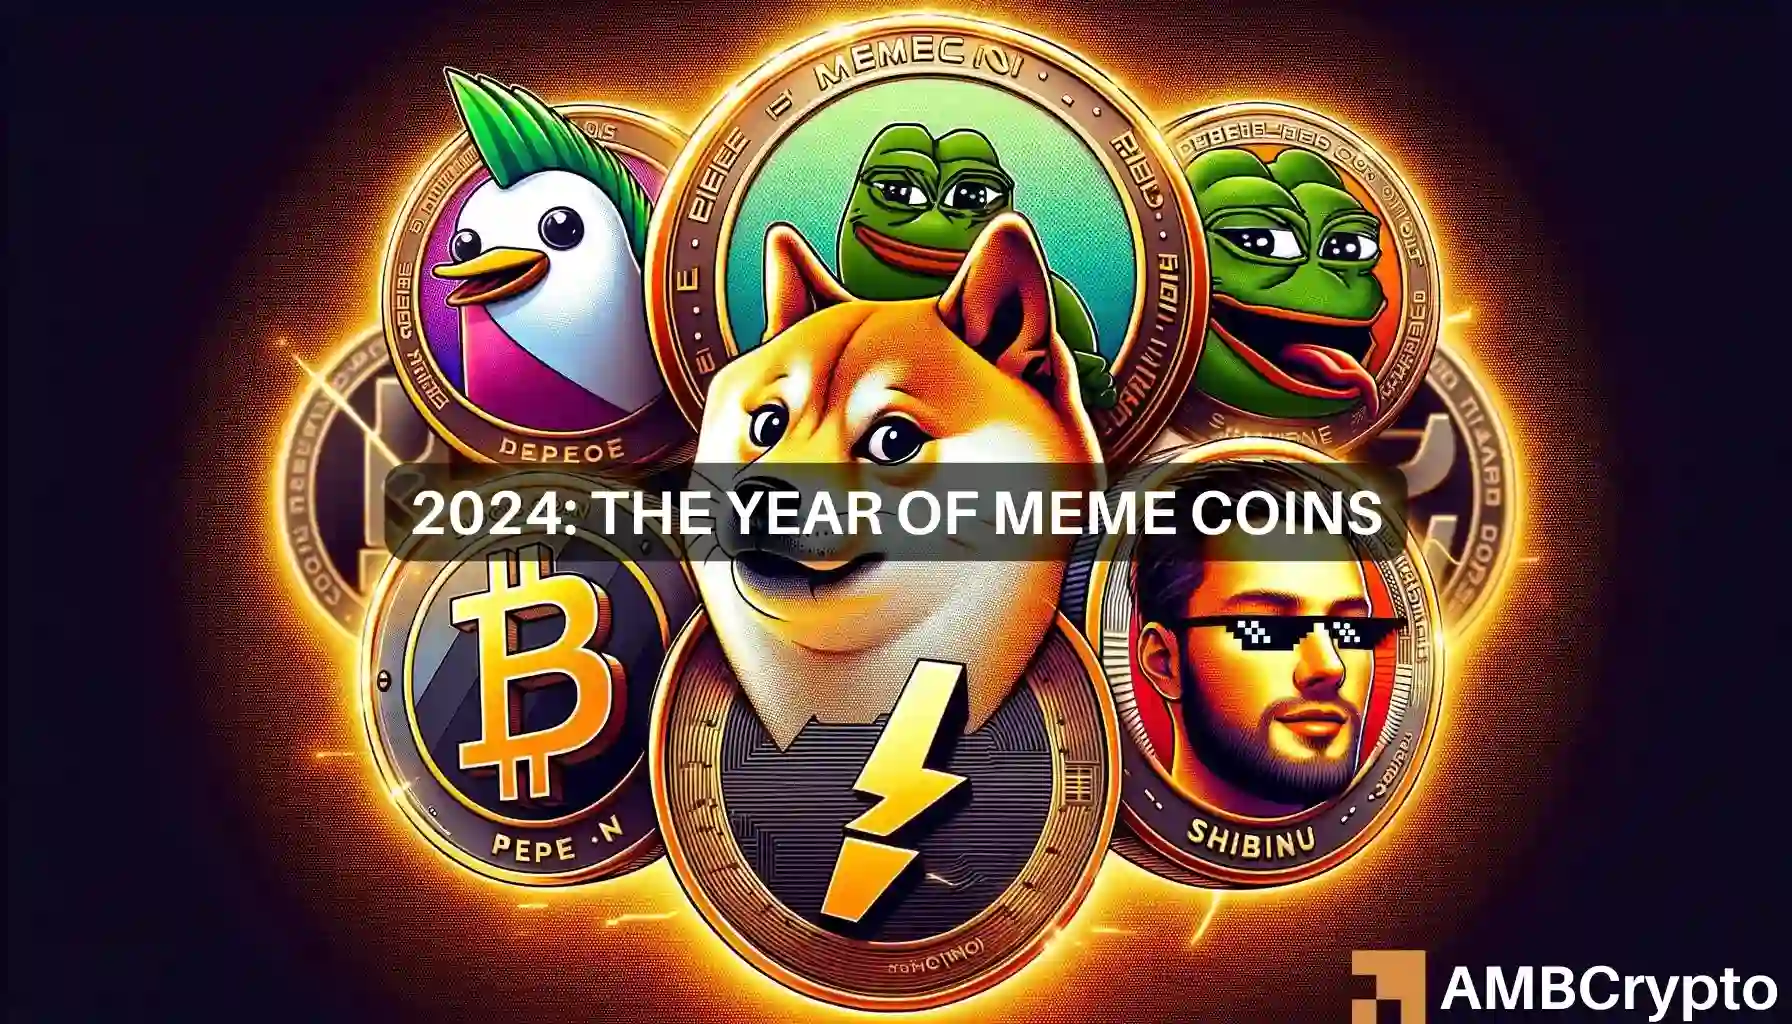 Will ongoing memecoin mania lead to a new ‘asset class’?